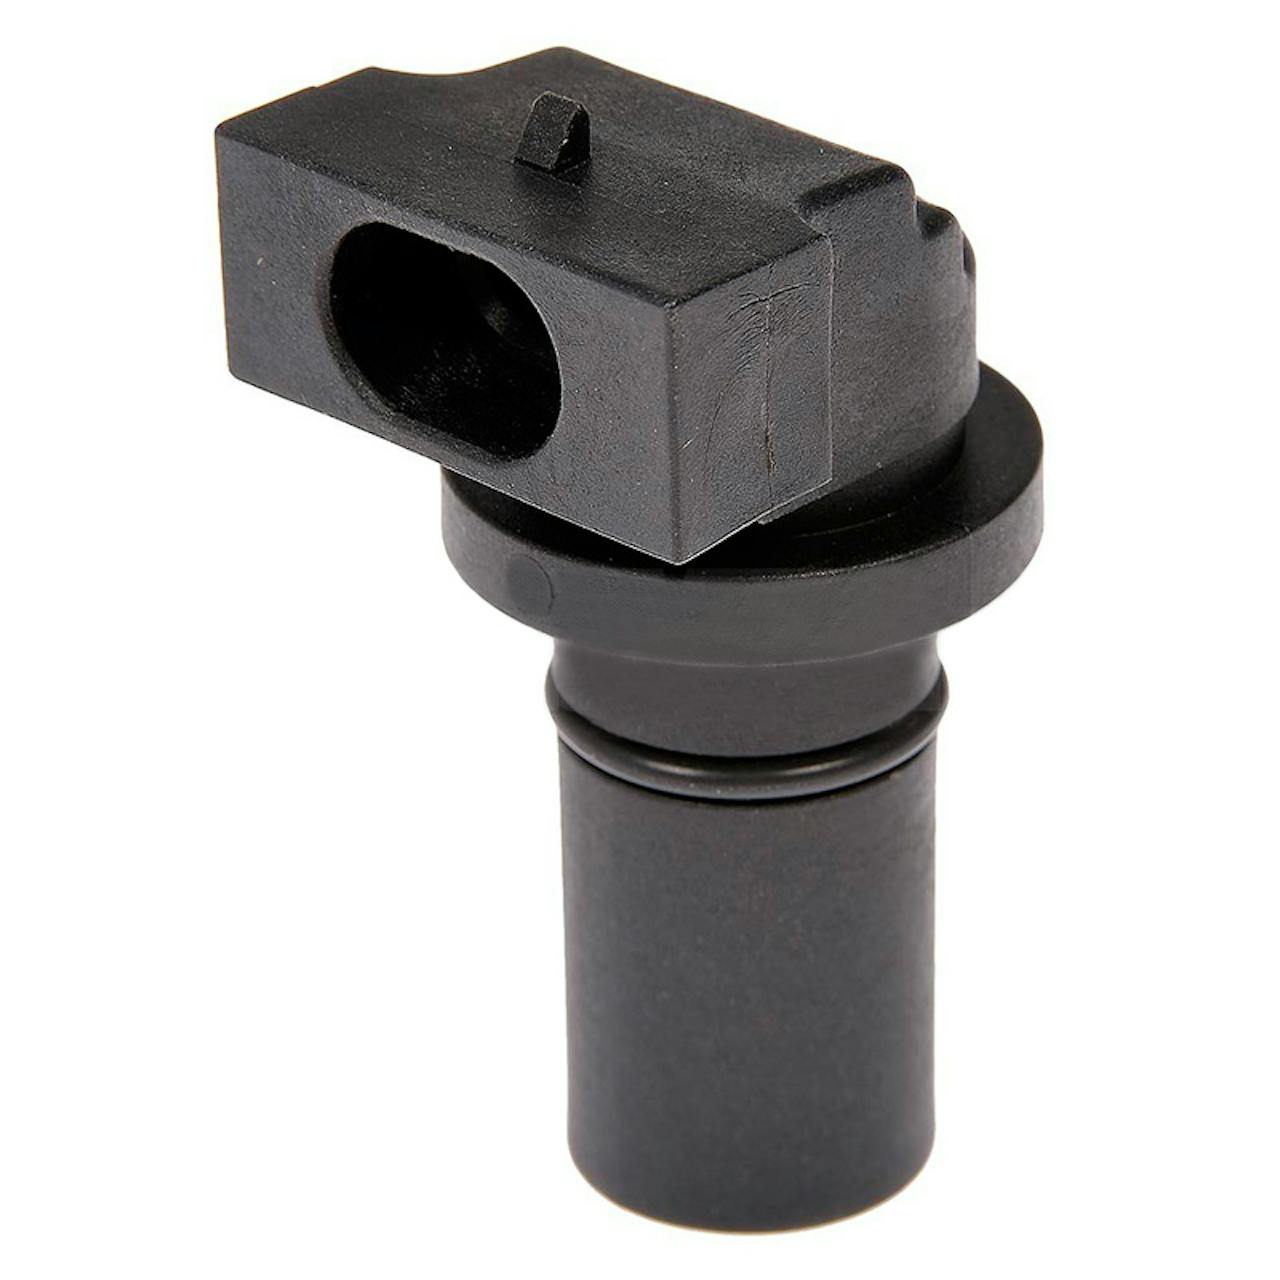 Cummins Isx Engine Speed Sensor 2 Location: Discover the Power of Precise Sensor Placement